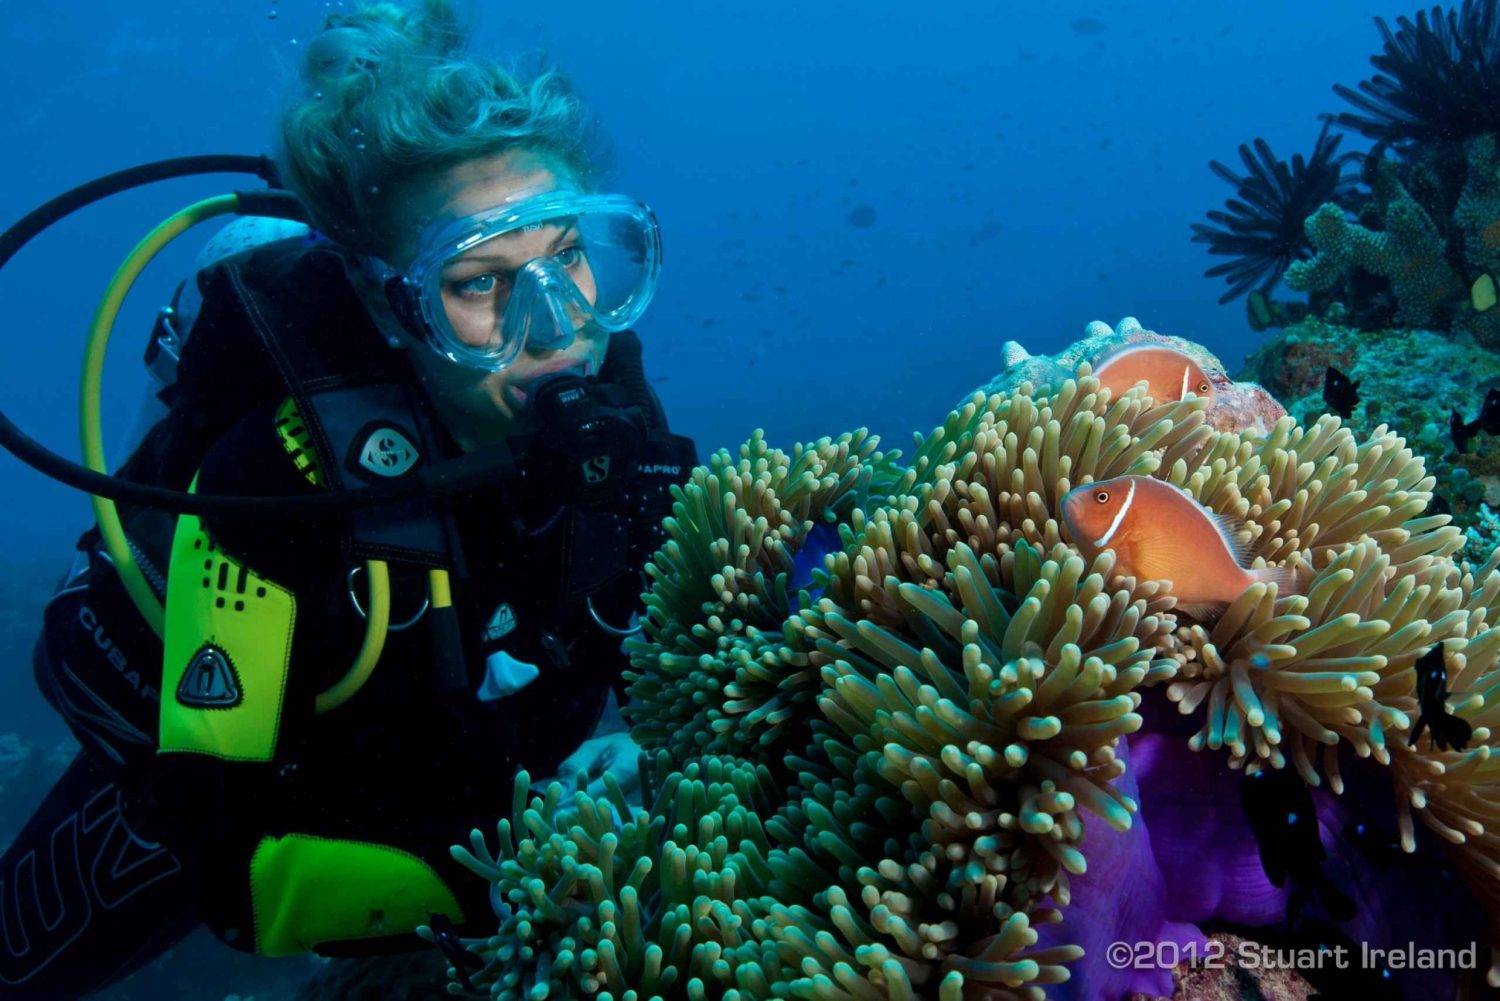 Tusa Reef Tours - premium all inclusive Great Barrier Reef